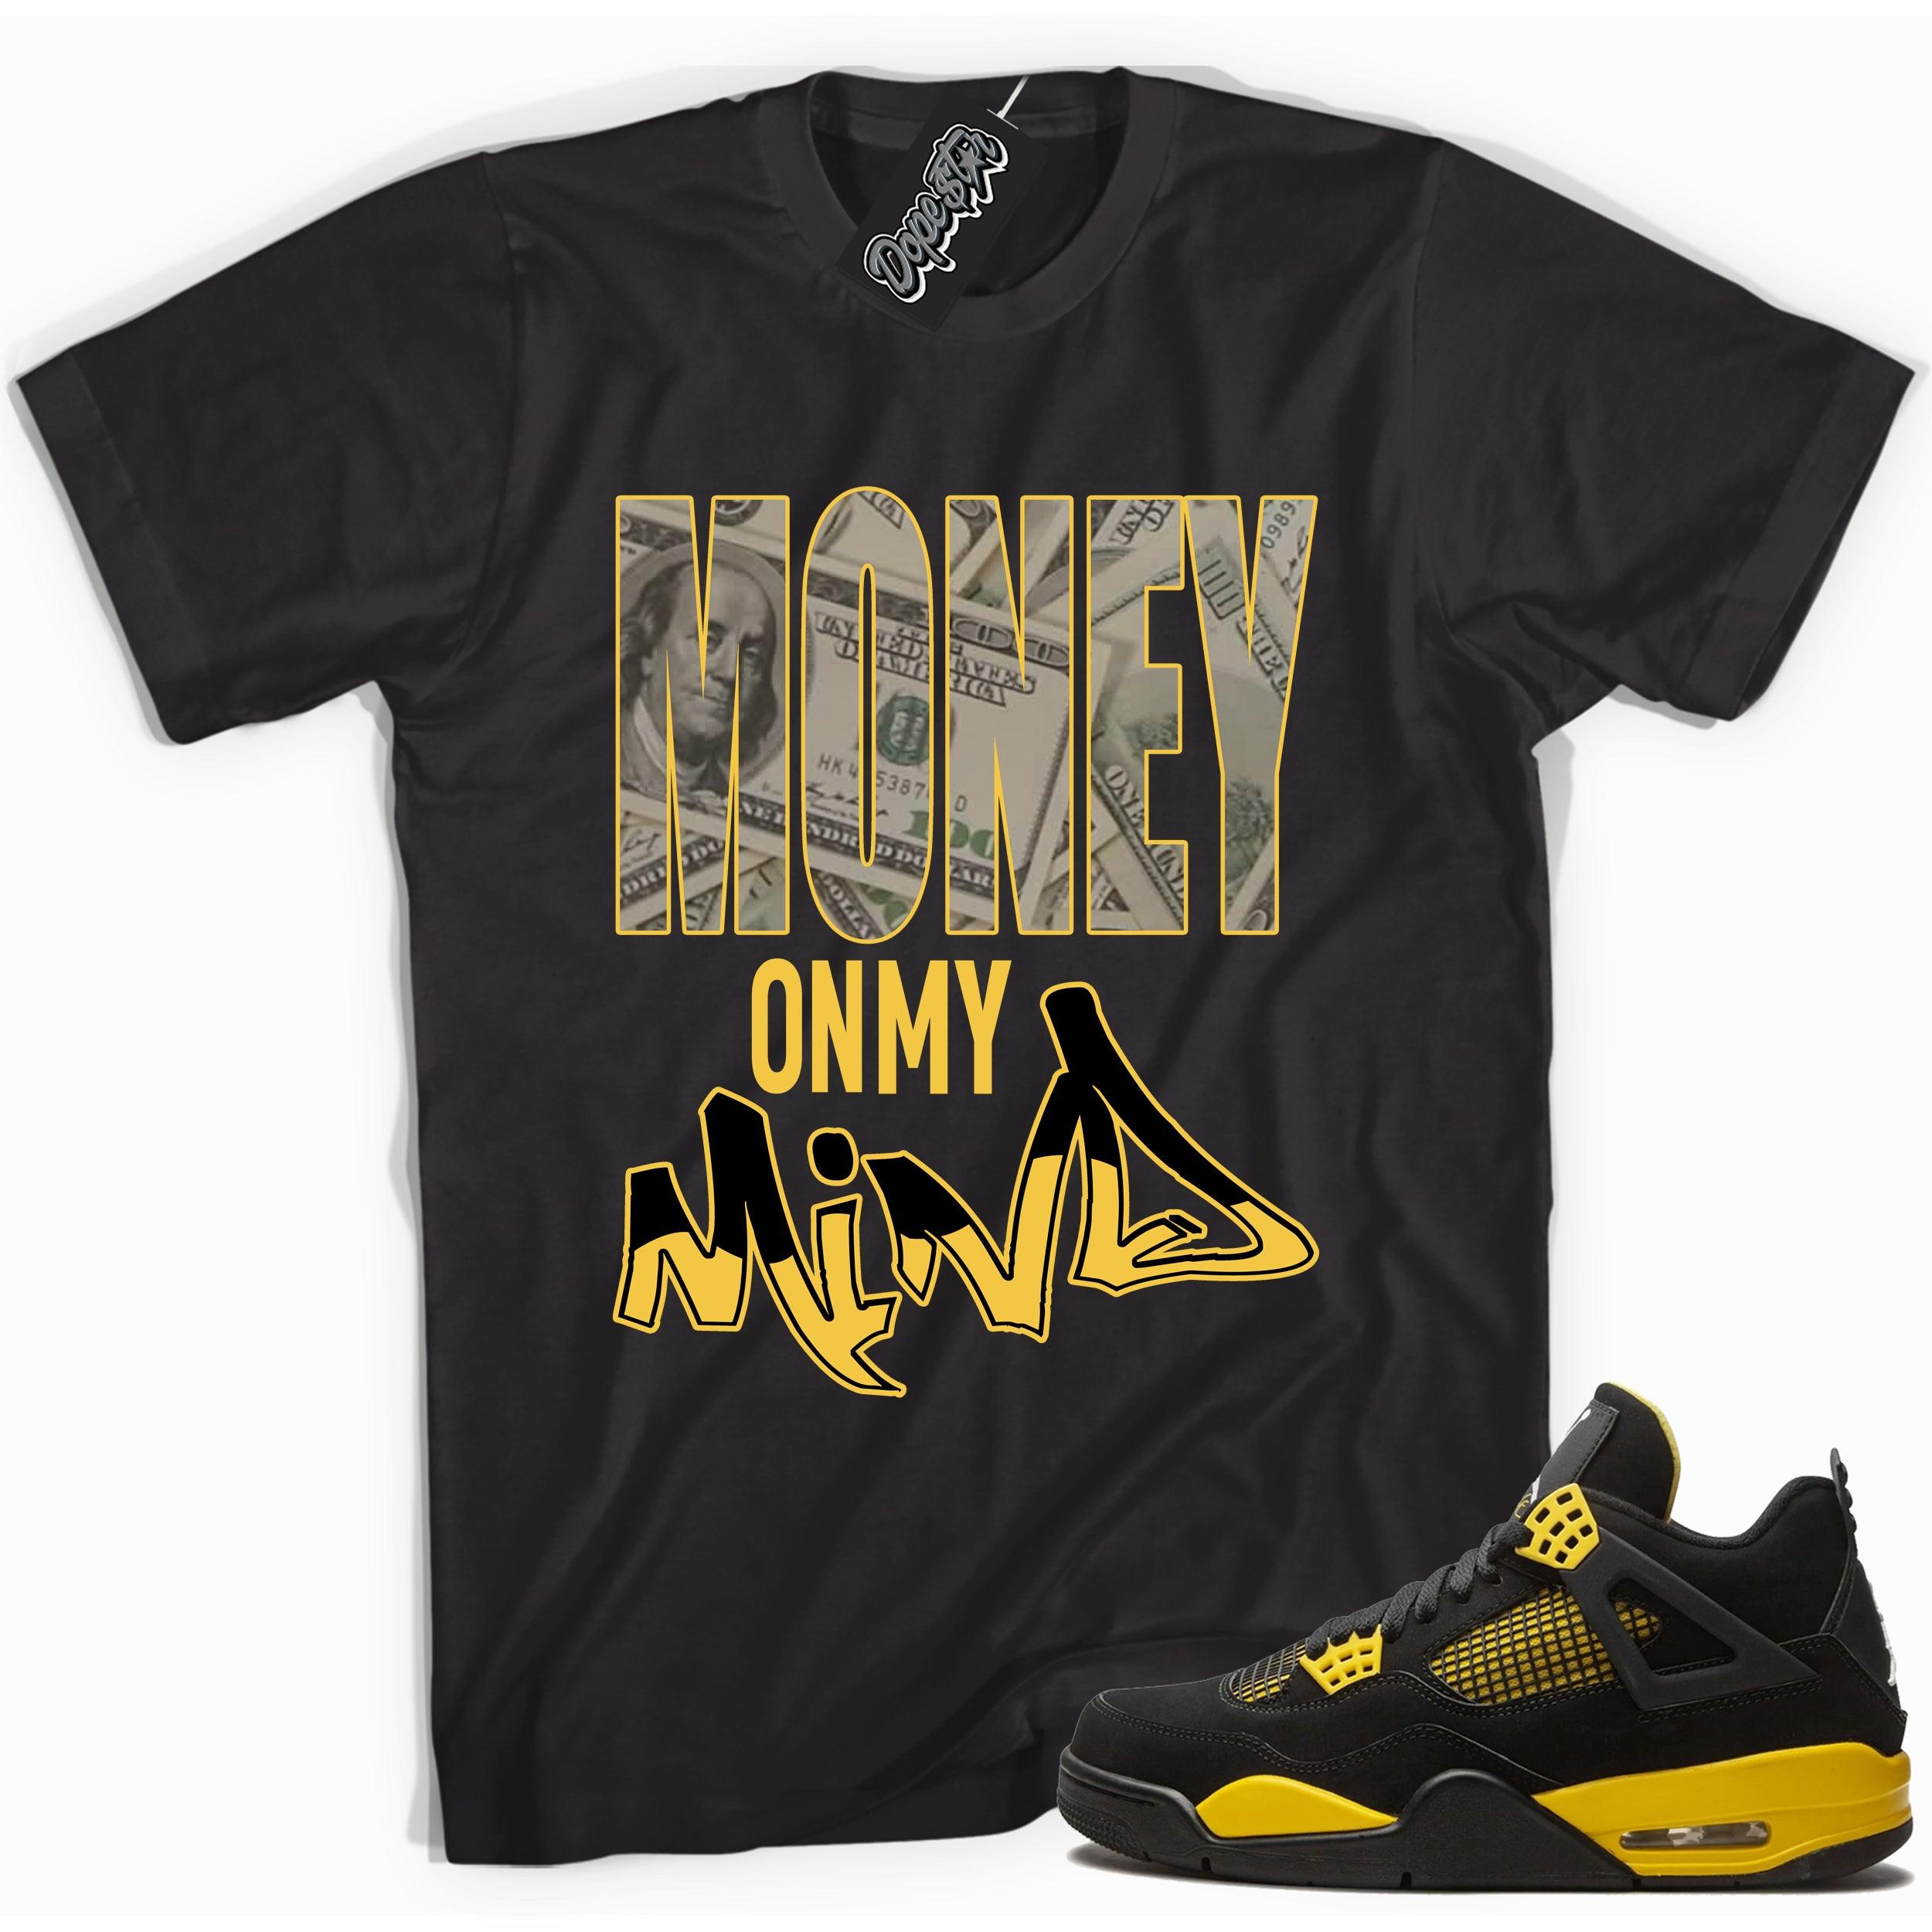 Cool black graphic tee with 'money on mind' print, that perfectly matches  Air Jordan 4 Thunder sneakers